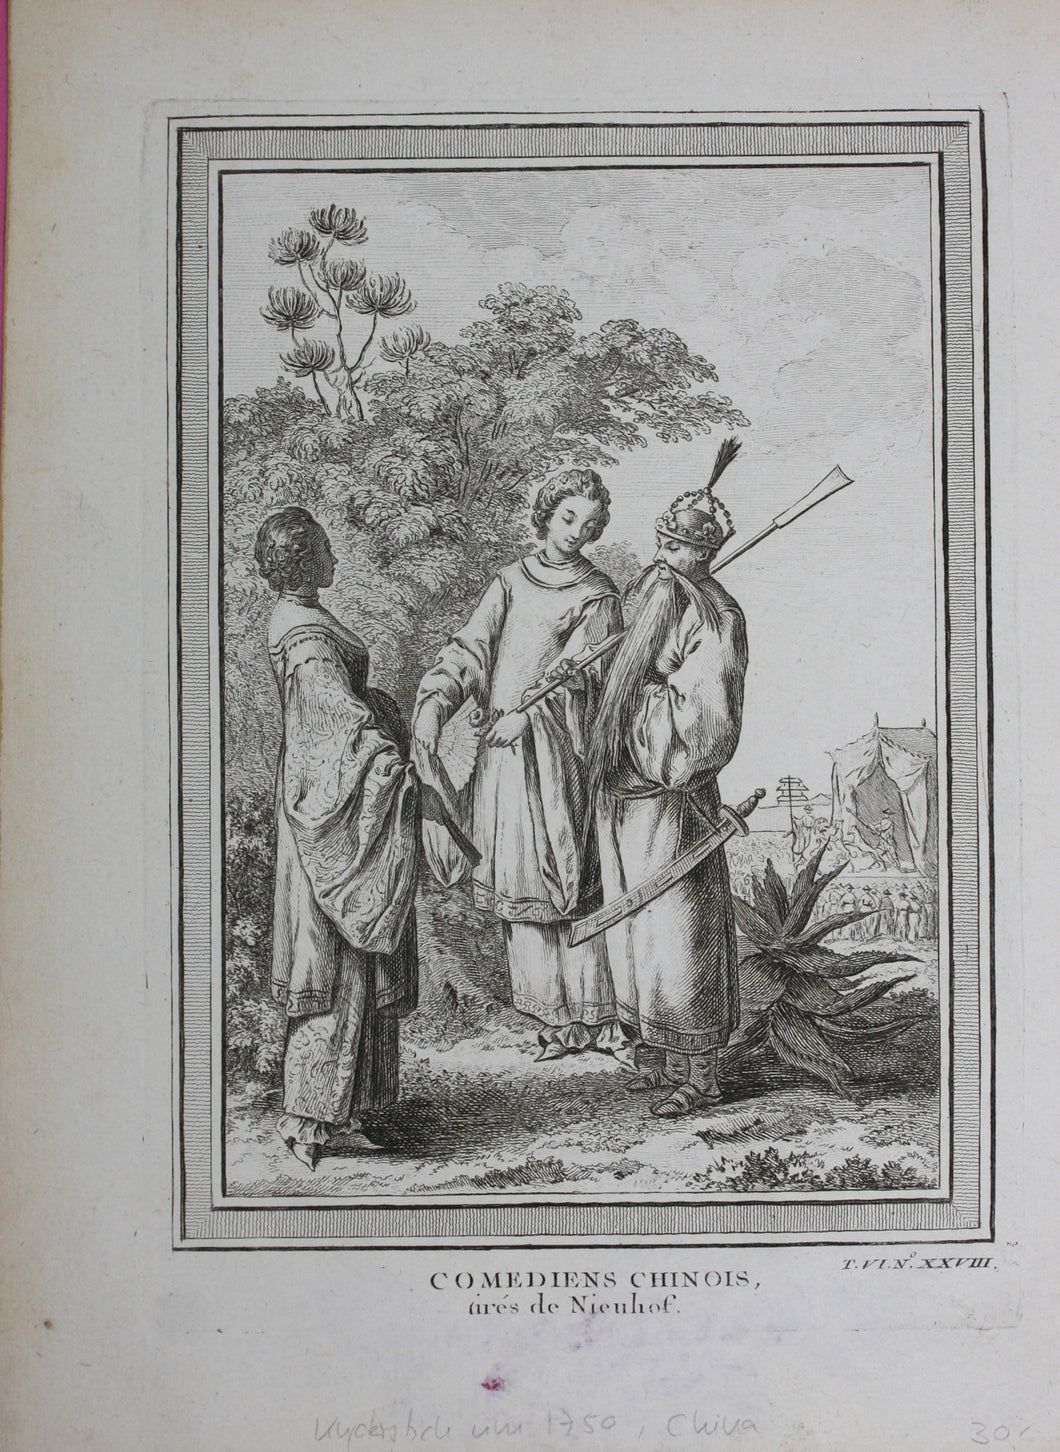 Johan Nieuhof, after. Comediens Chinois. Engraving. 1748.